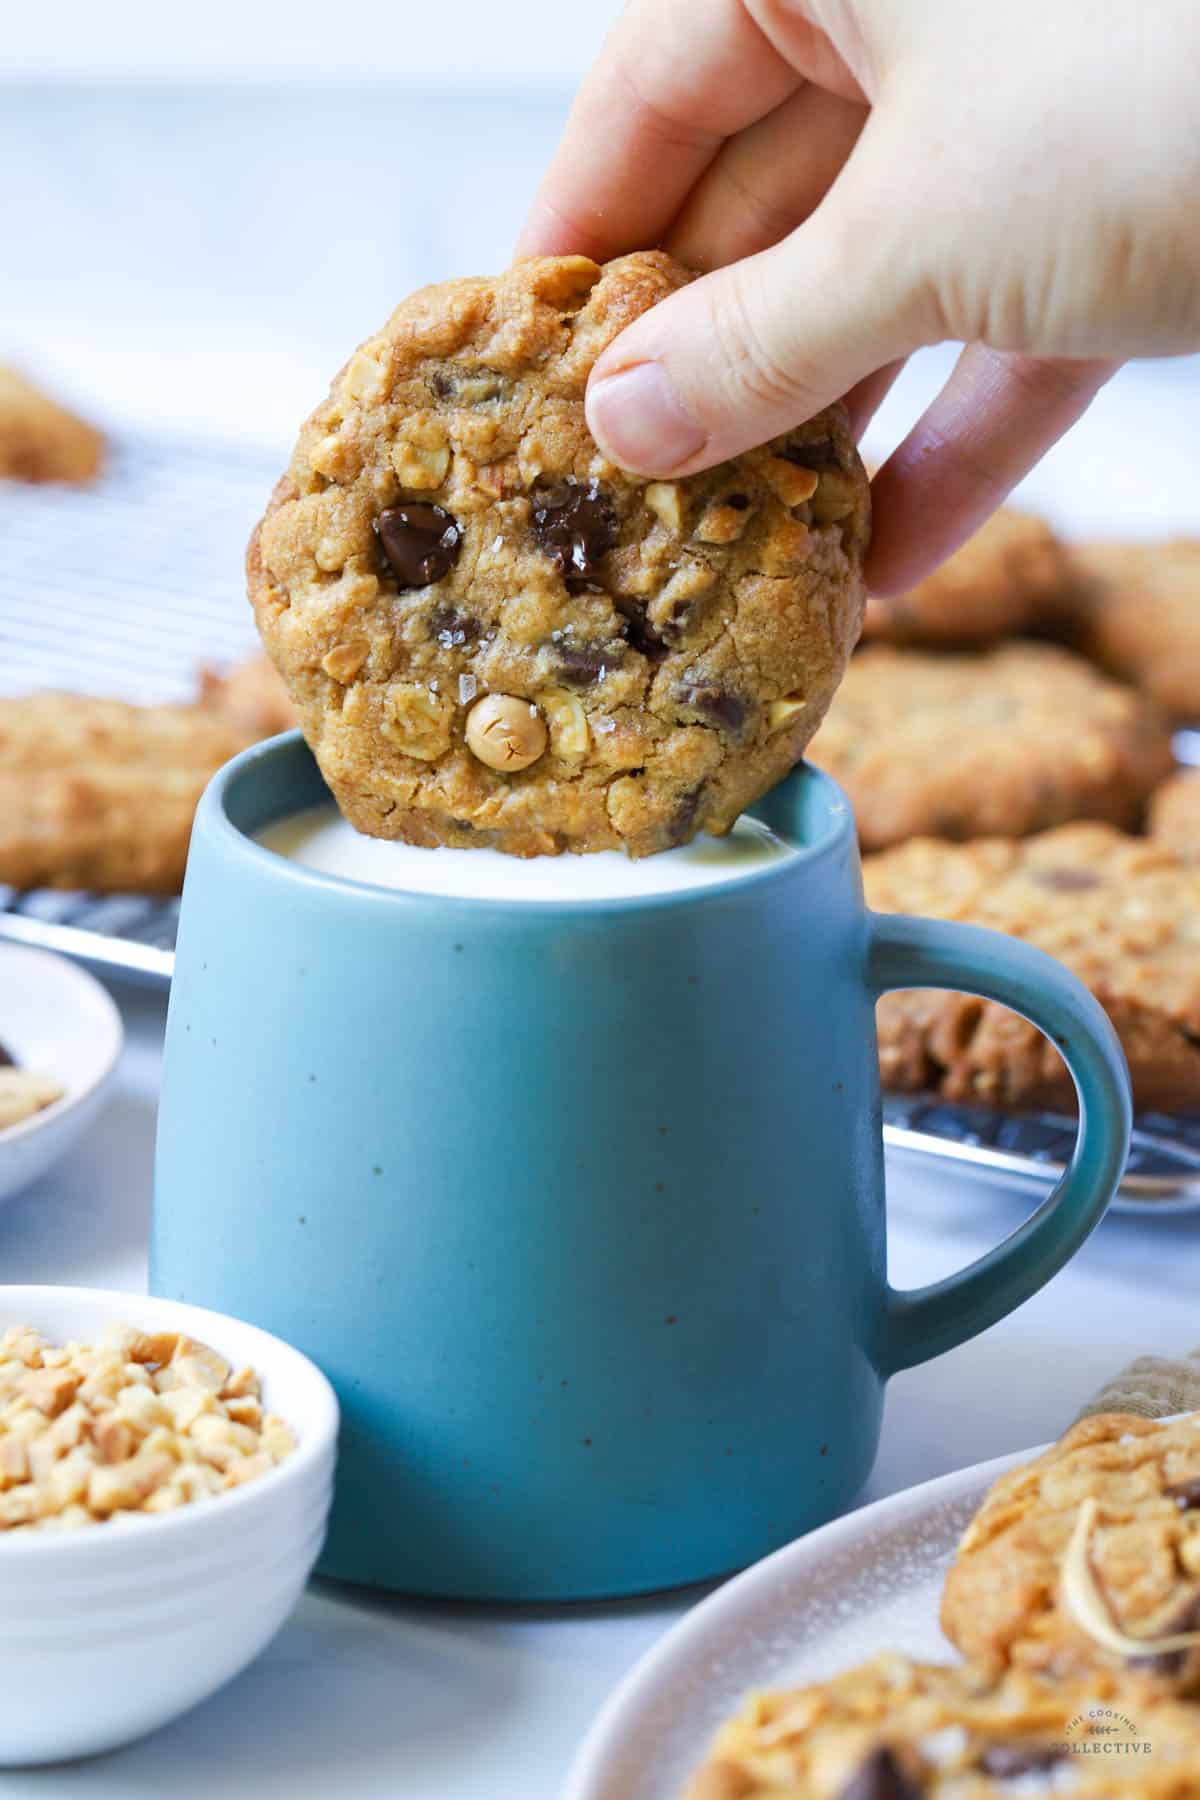 a hand dipping a cookie in a green mug filled with milk